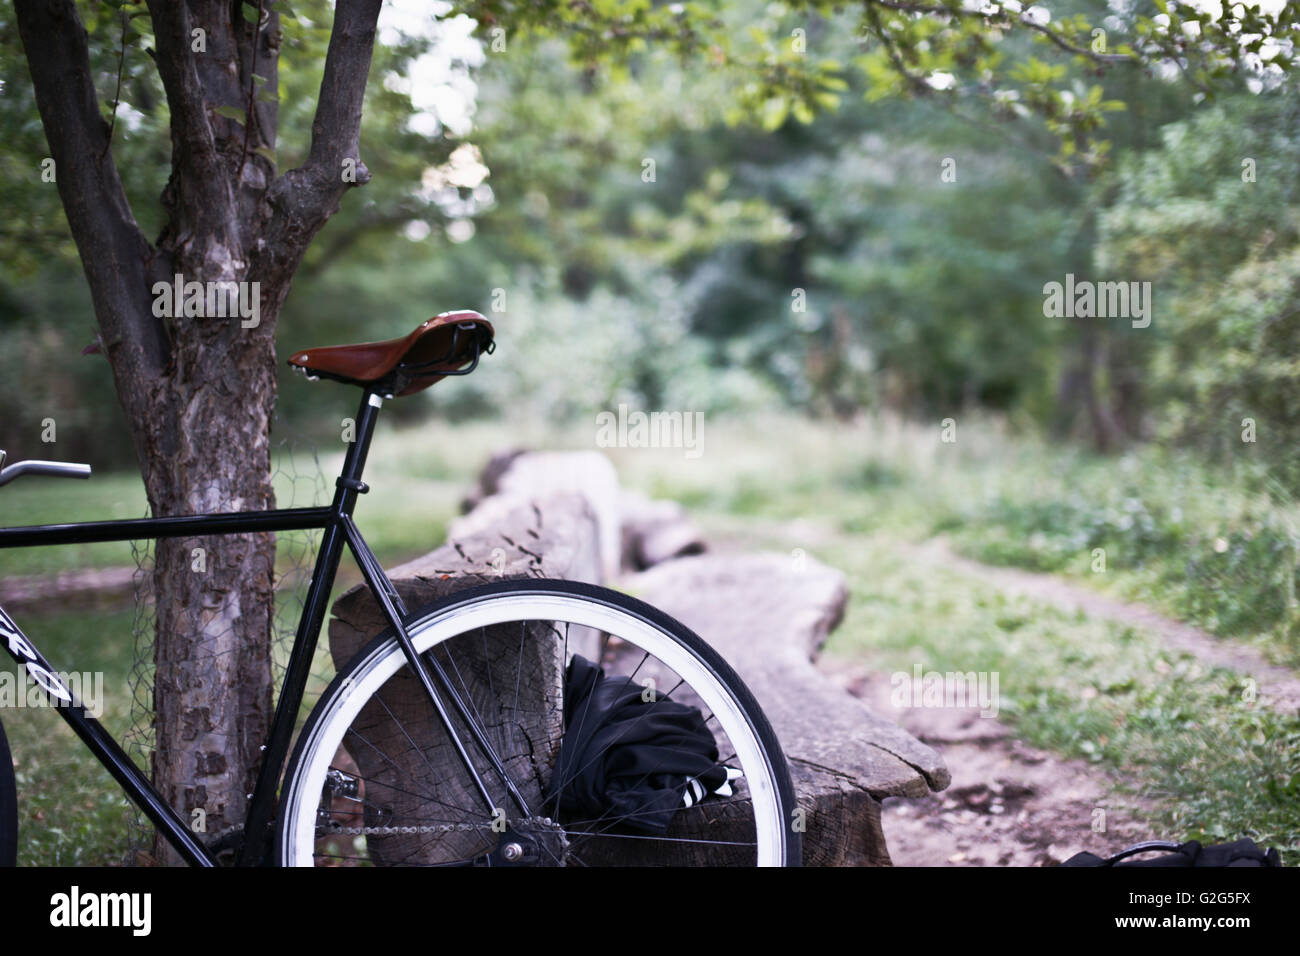 Bicycle Leaning Against Tree Stock Photo